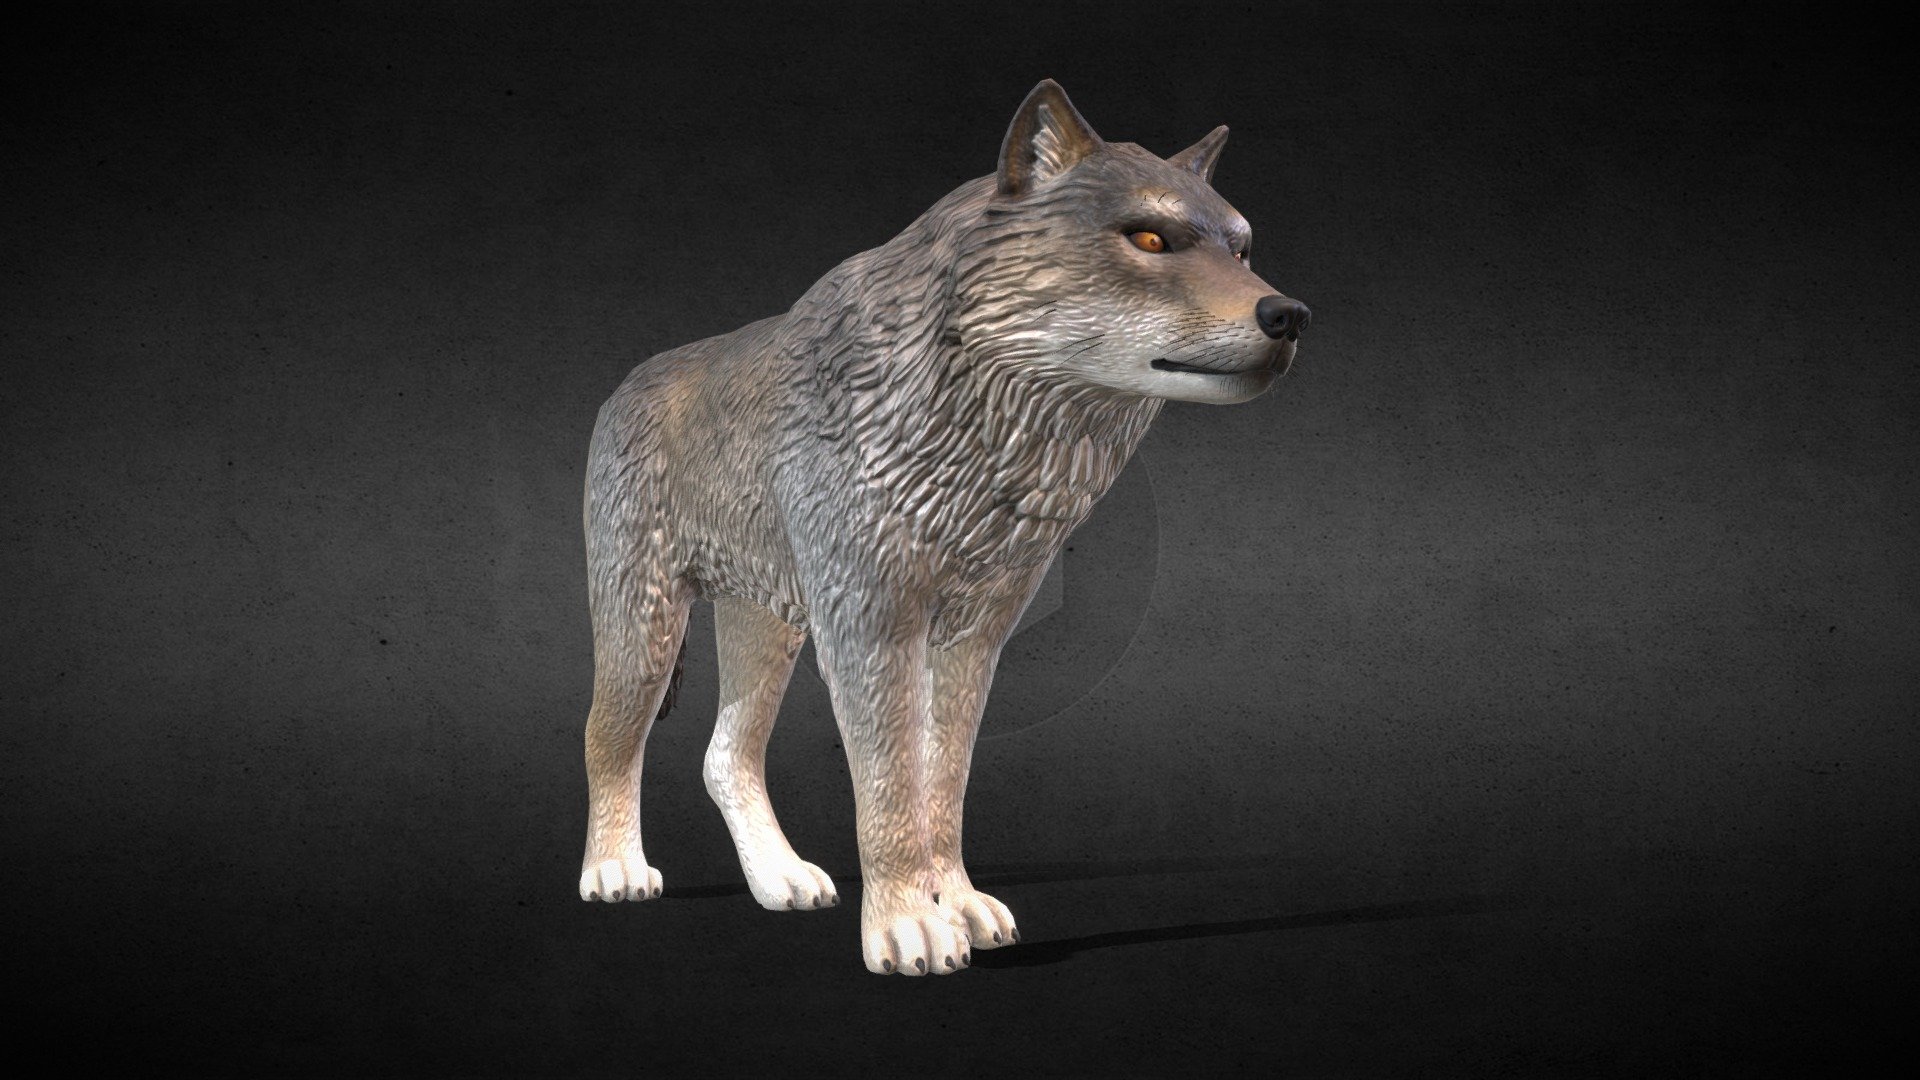 Canis lupus lupus. Also known as the common wolf or Middle Russian forest wolf, is a subspecies of grey wolf native to Europe and the forest and steppe zones of the former Soviet Union. Aside from an extensive paleontological record, Indo-European languages typically have several words for &ldquo;wolf